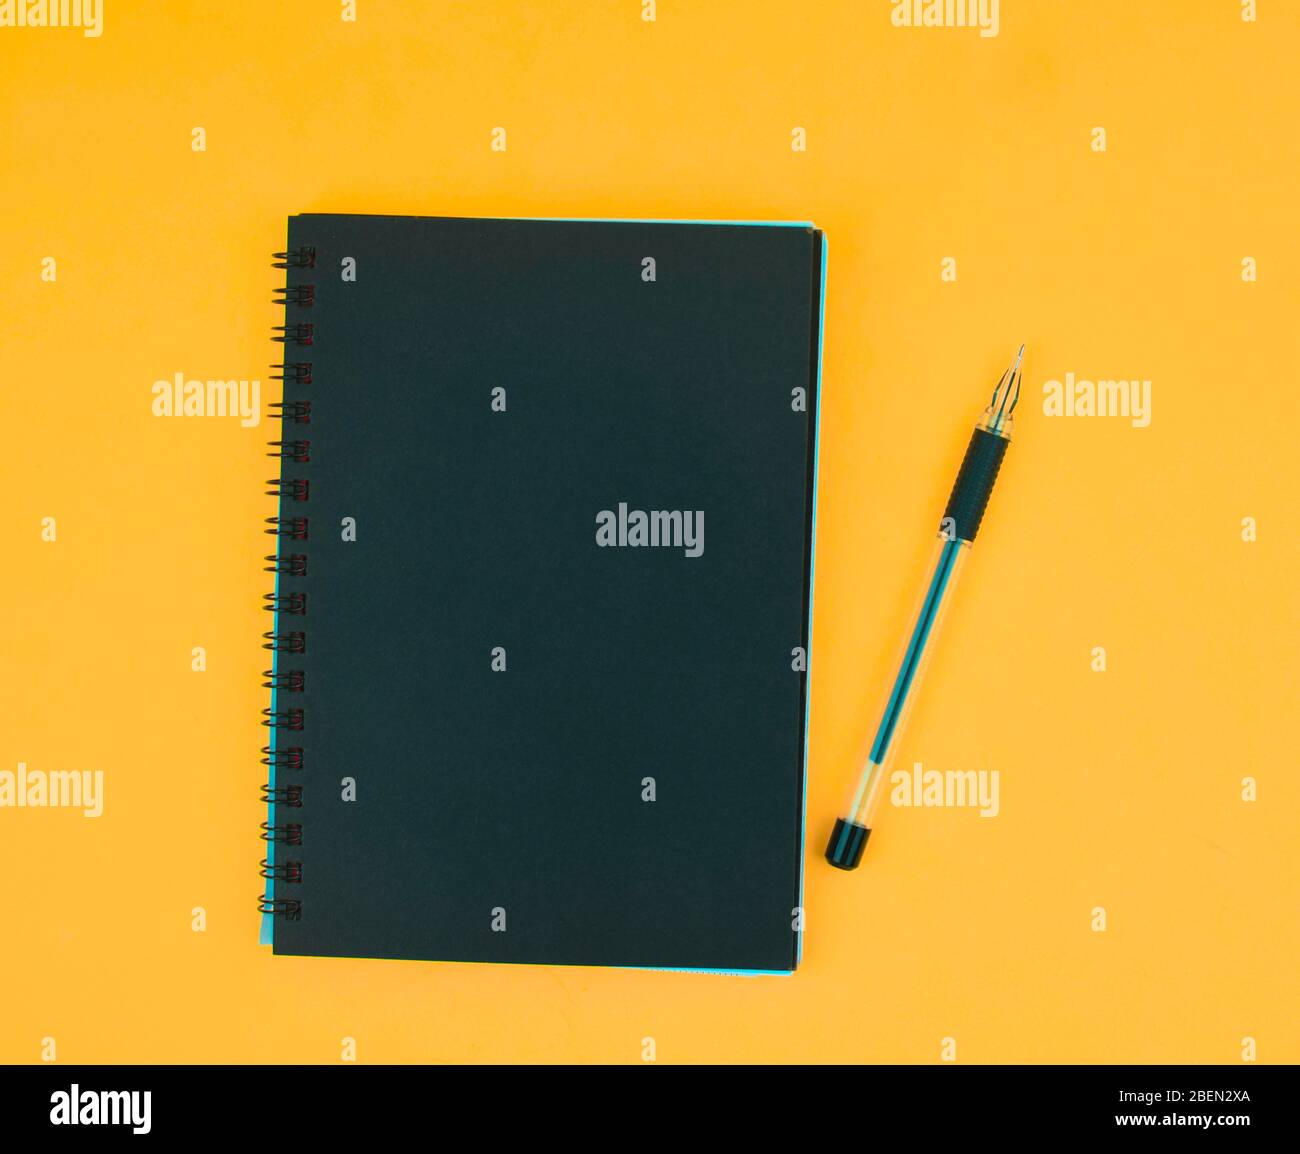 A black ball point pen placed beside a black colored paper diary on an orange paper background Stock Photo